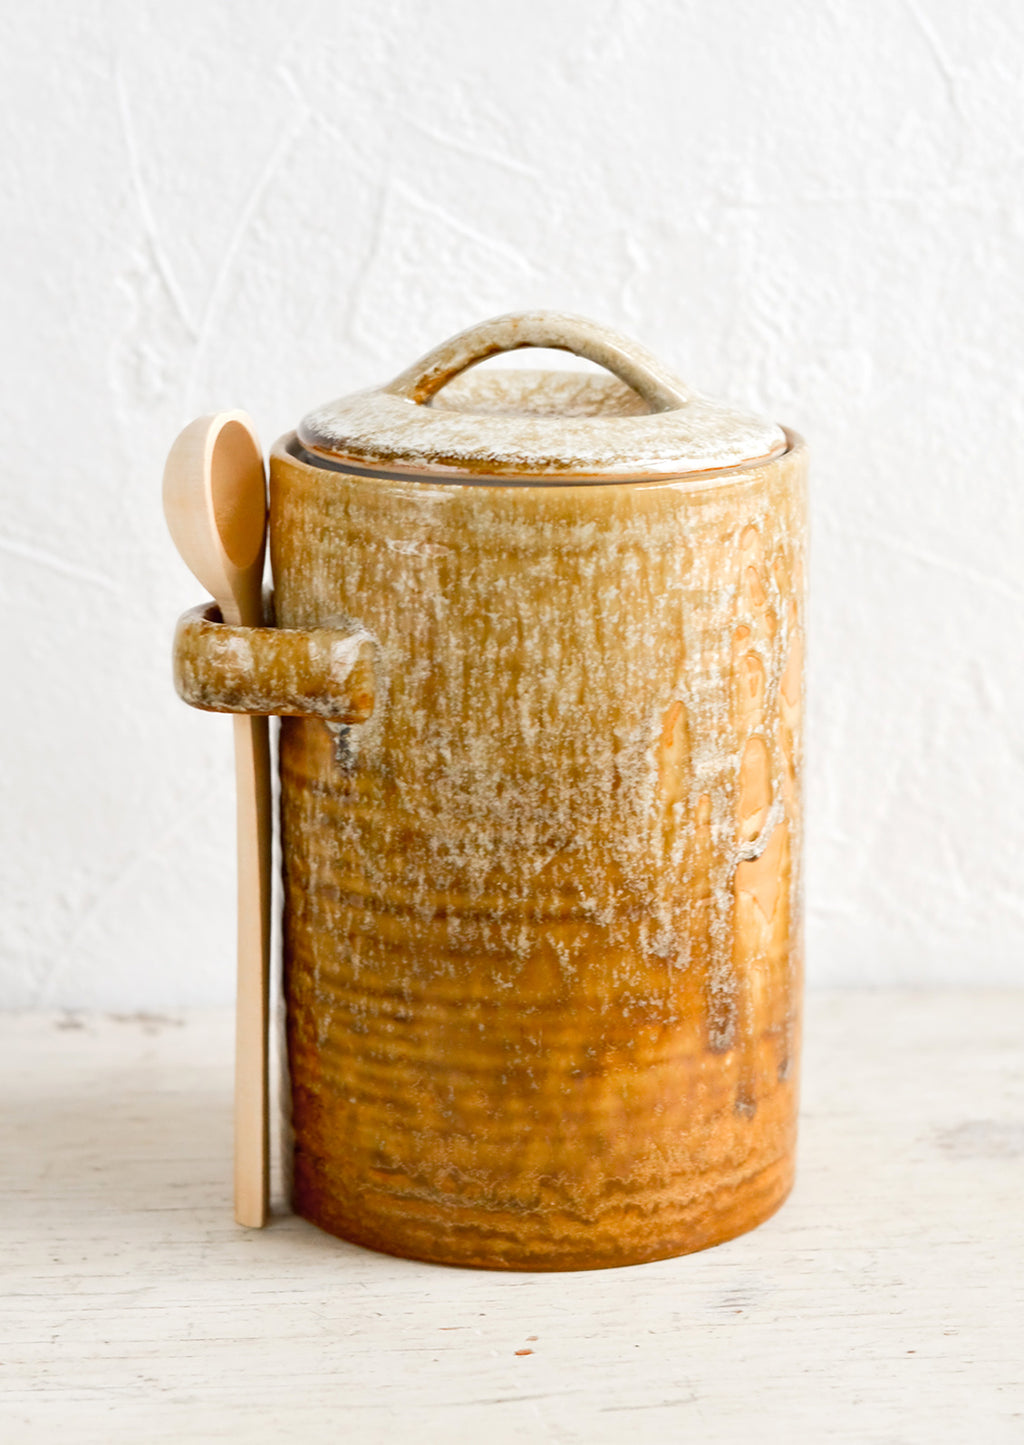 Tall / Light Brown: A ceramic storage jar in rustic light brown glaze with a wooden spoon on the side.